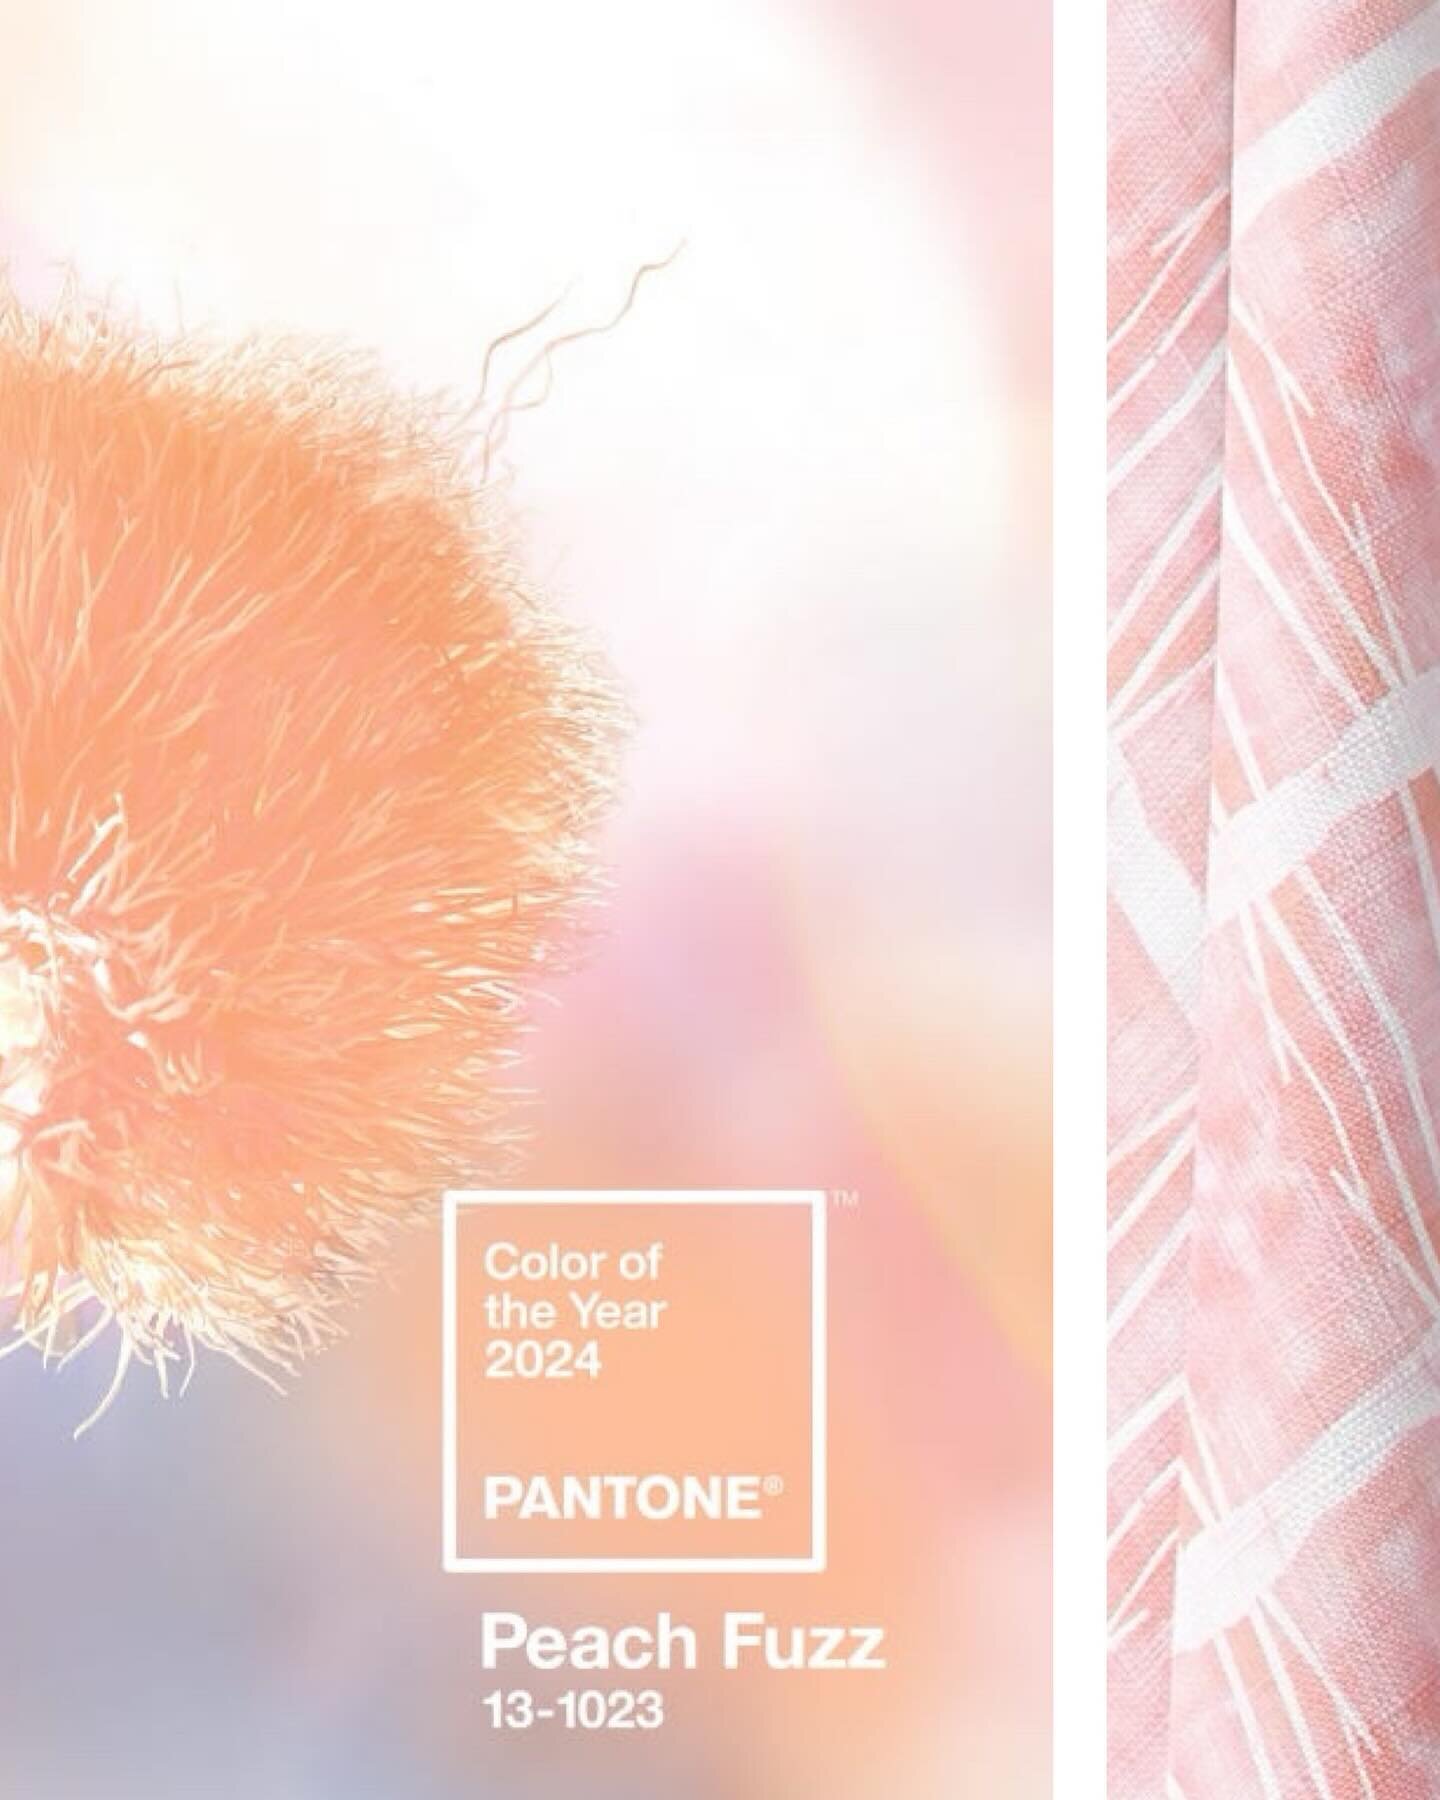 PANTONE color of the year &ldquo;Peach Fuzz&rdquo;  captures our desire to nurture ourselves and others. It&rsquo;s a velvety gentle peach tone whose all-embracing spirit enriches mind, body, and soul. At this time of the year and with the state of t